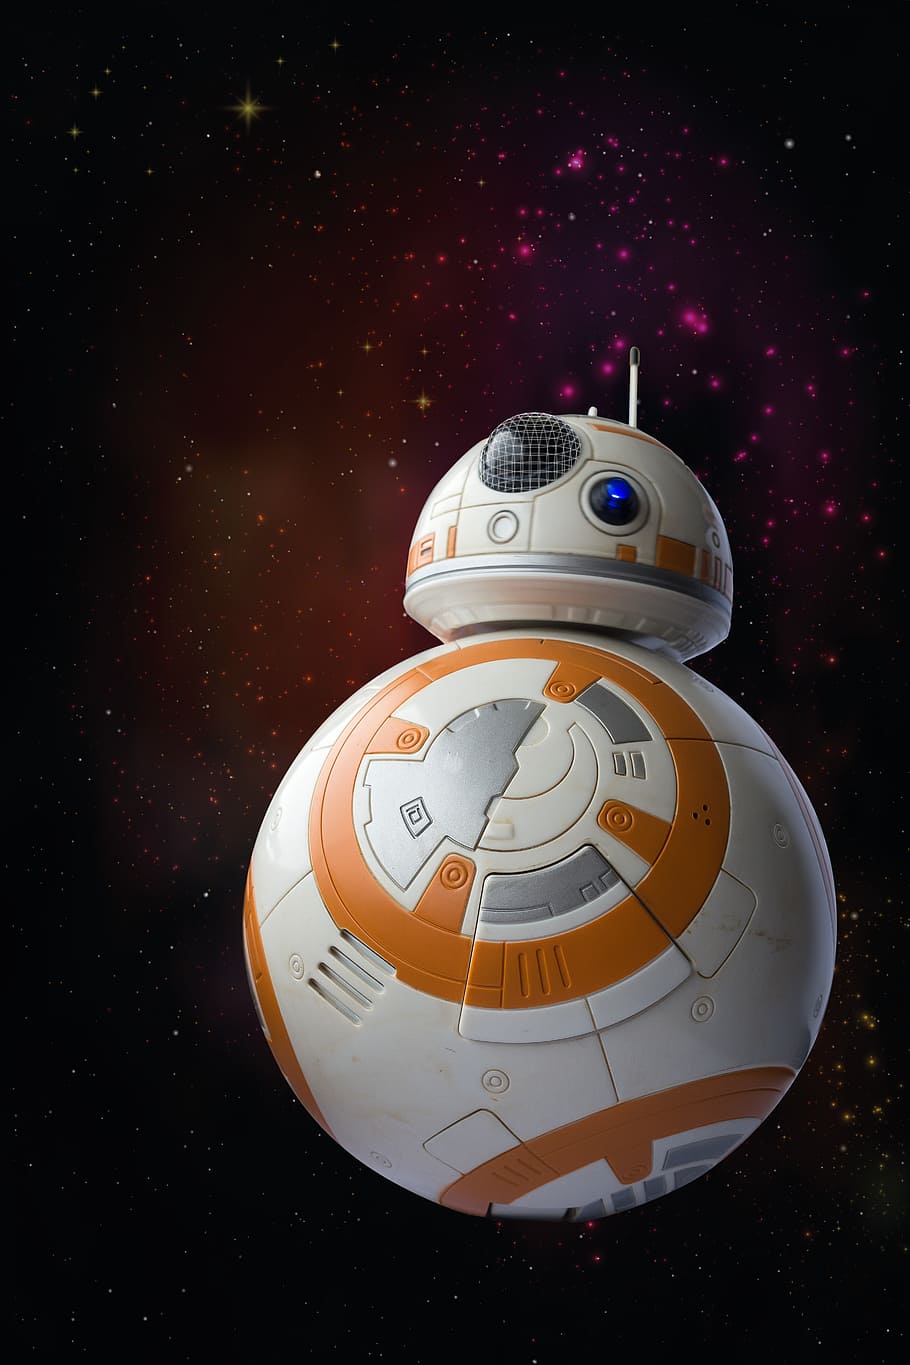 bb-8, star wars movie, bb8-droid, droid, robot, model, toys, cosmos, space, planet